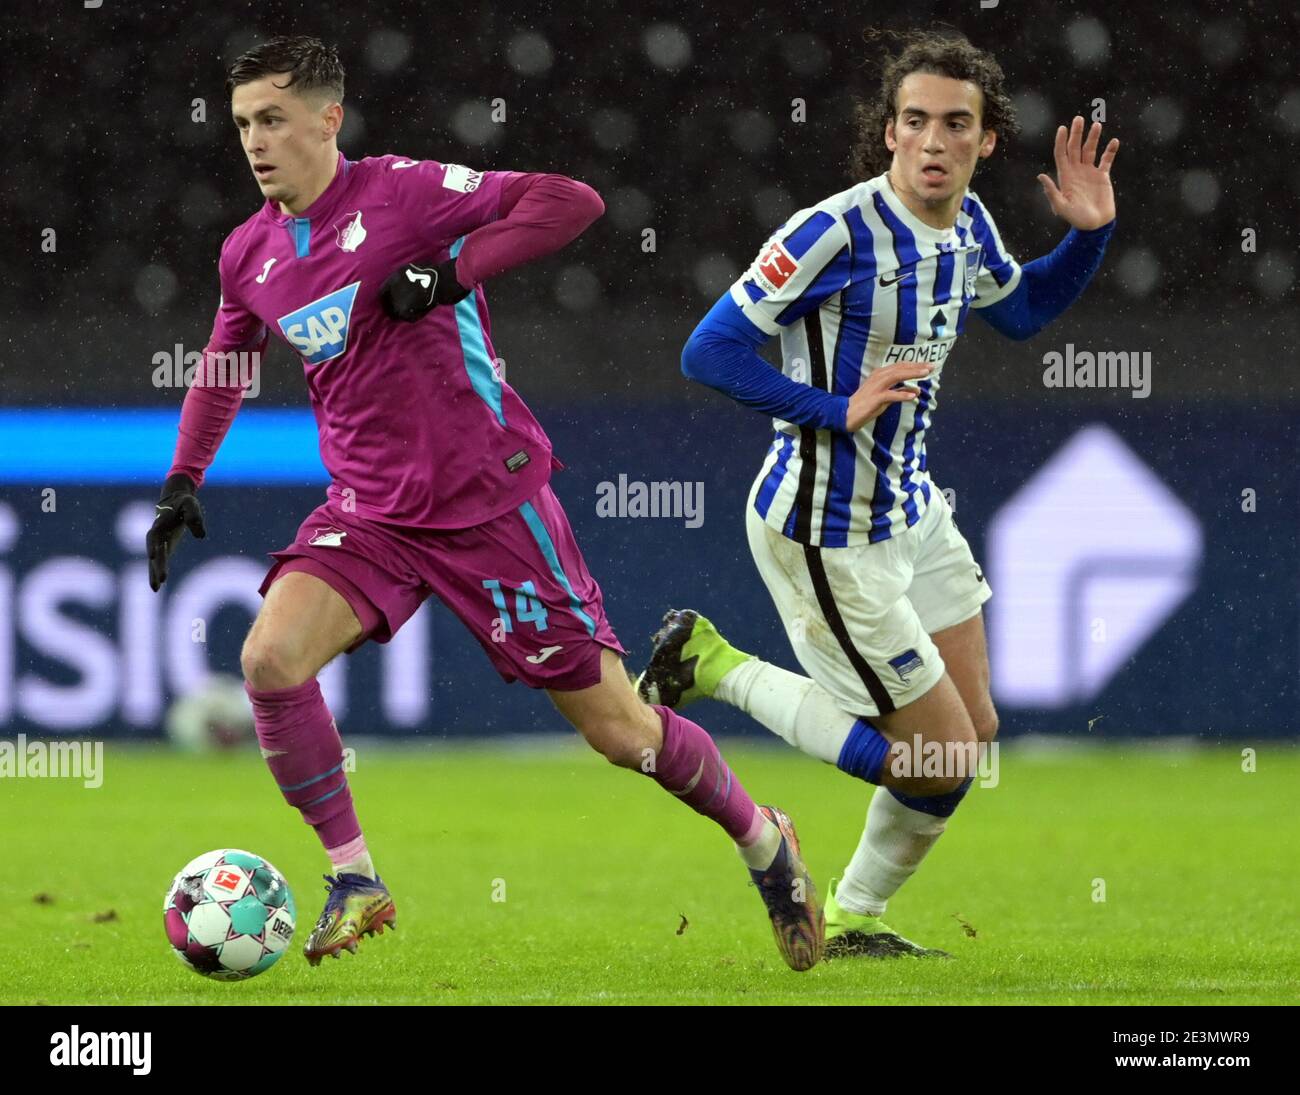 Berlin, Germany. 19th Jan, 2021. Football: Bundesliga, Hertha BSC - TSG 1899 Hoffenheim, Matchday 17 at Olympiastadion. Matteo Guendouzi (r) of Hertha against Christoph Baumgartner (l) of Hoffenheim. Credit: Soeren Stache/dpa-Zentralbild/ZB - IMPORTANT NOTE: In accordance with the regulations of the DFL Deutsche Fußball Liga and/or the DFB Deutscher Fußball-Bund, it is prohibited to use or have used photographs taken in the stadium and/or of the match in the form of sequence pictures and/or video-like photo series./dpa/Alamy Live News Stock Photo